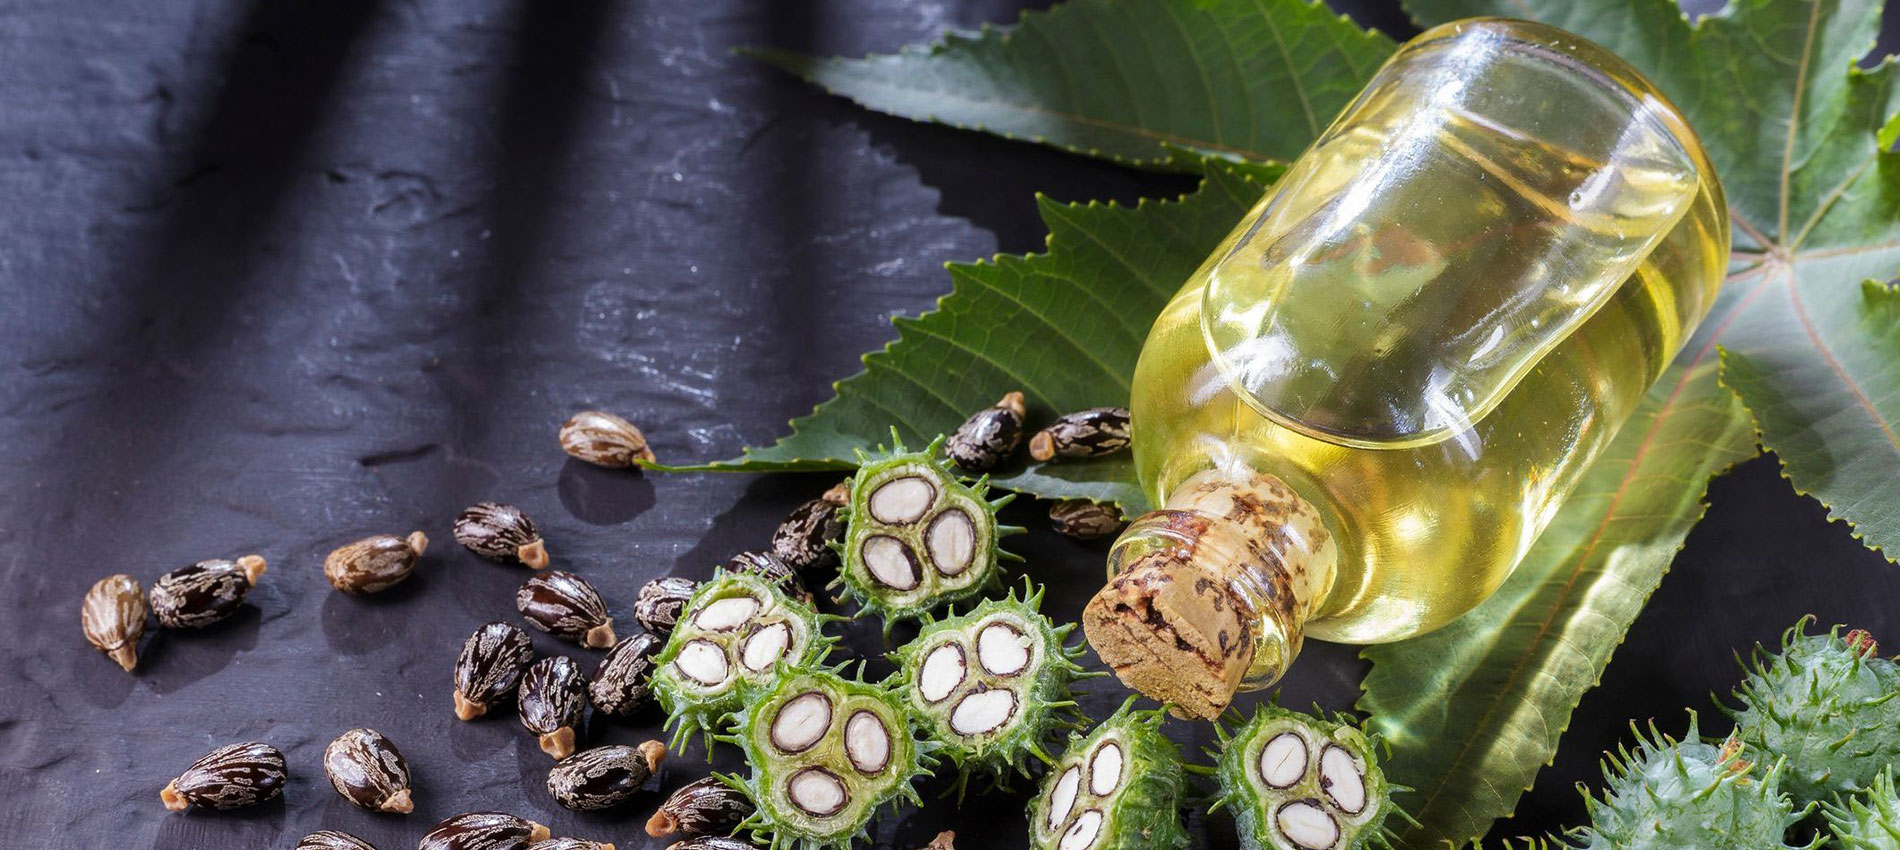 Castor Oil For Hair Growth: Is It Effective?